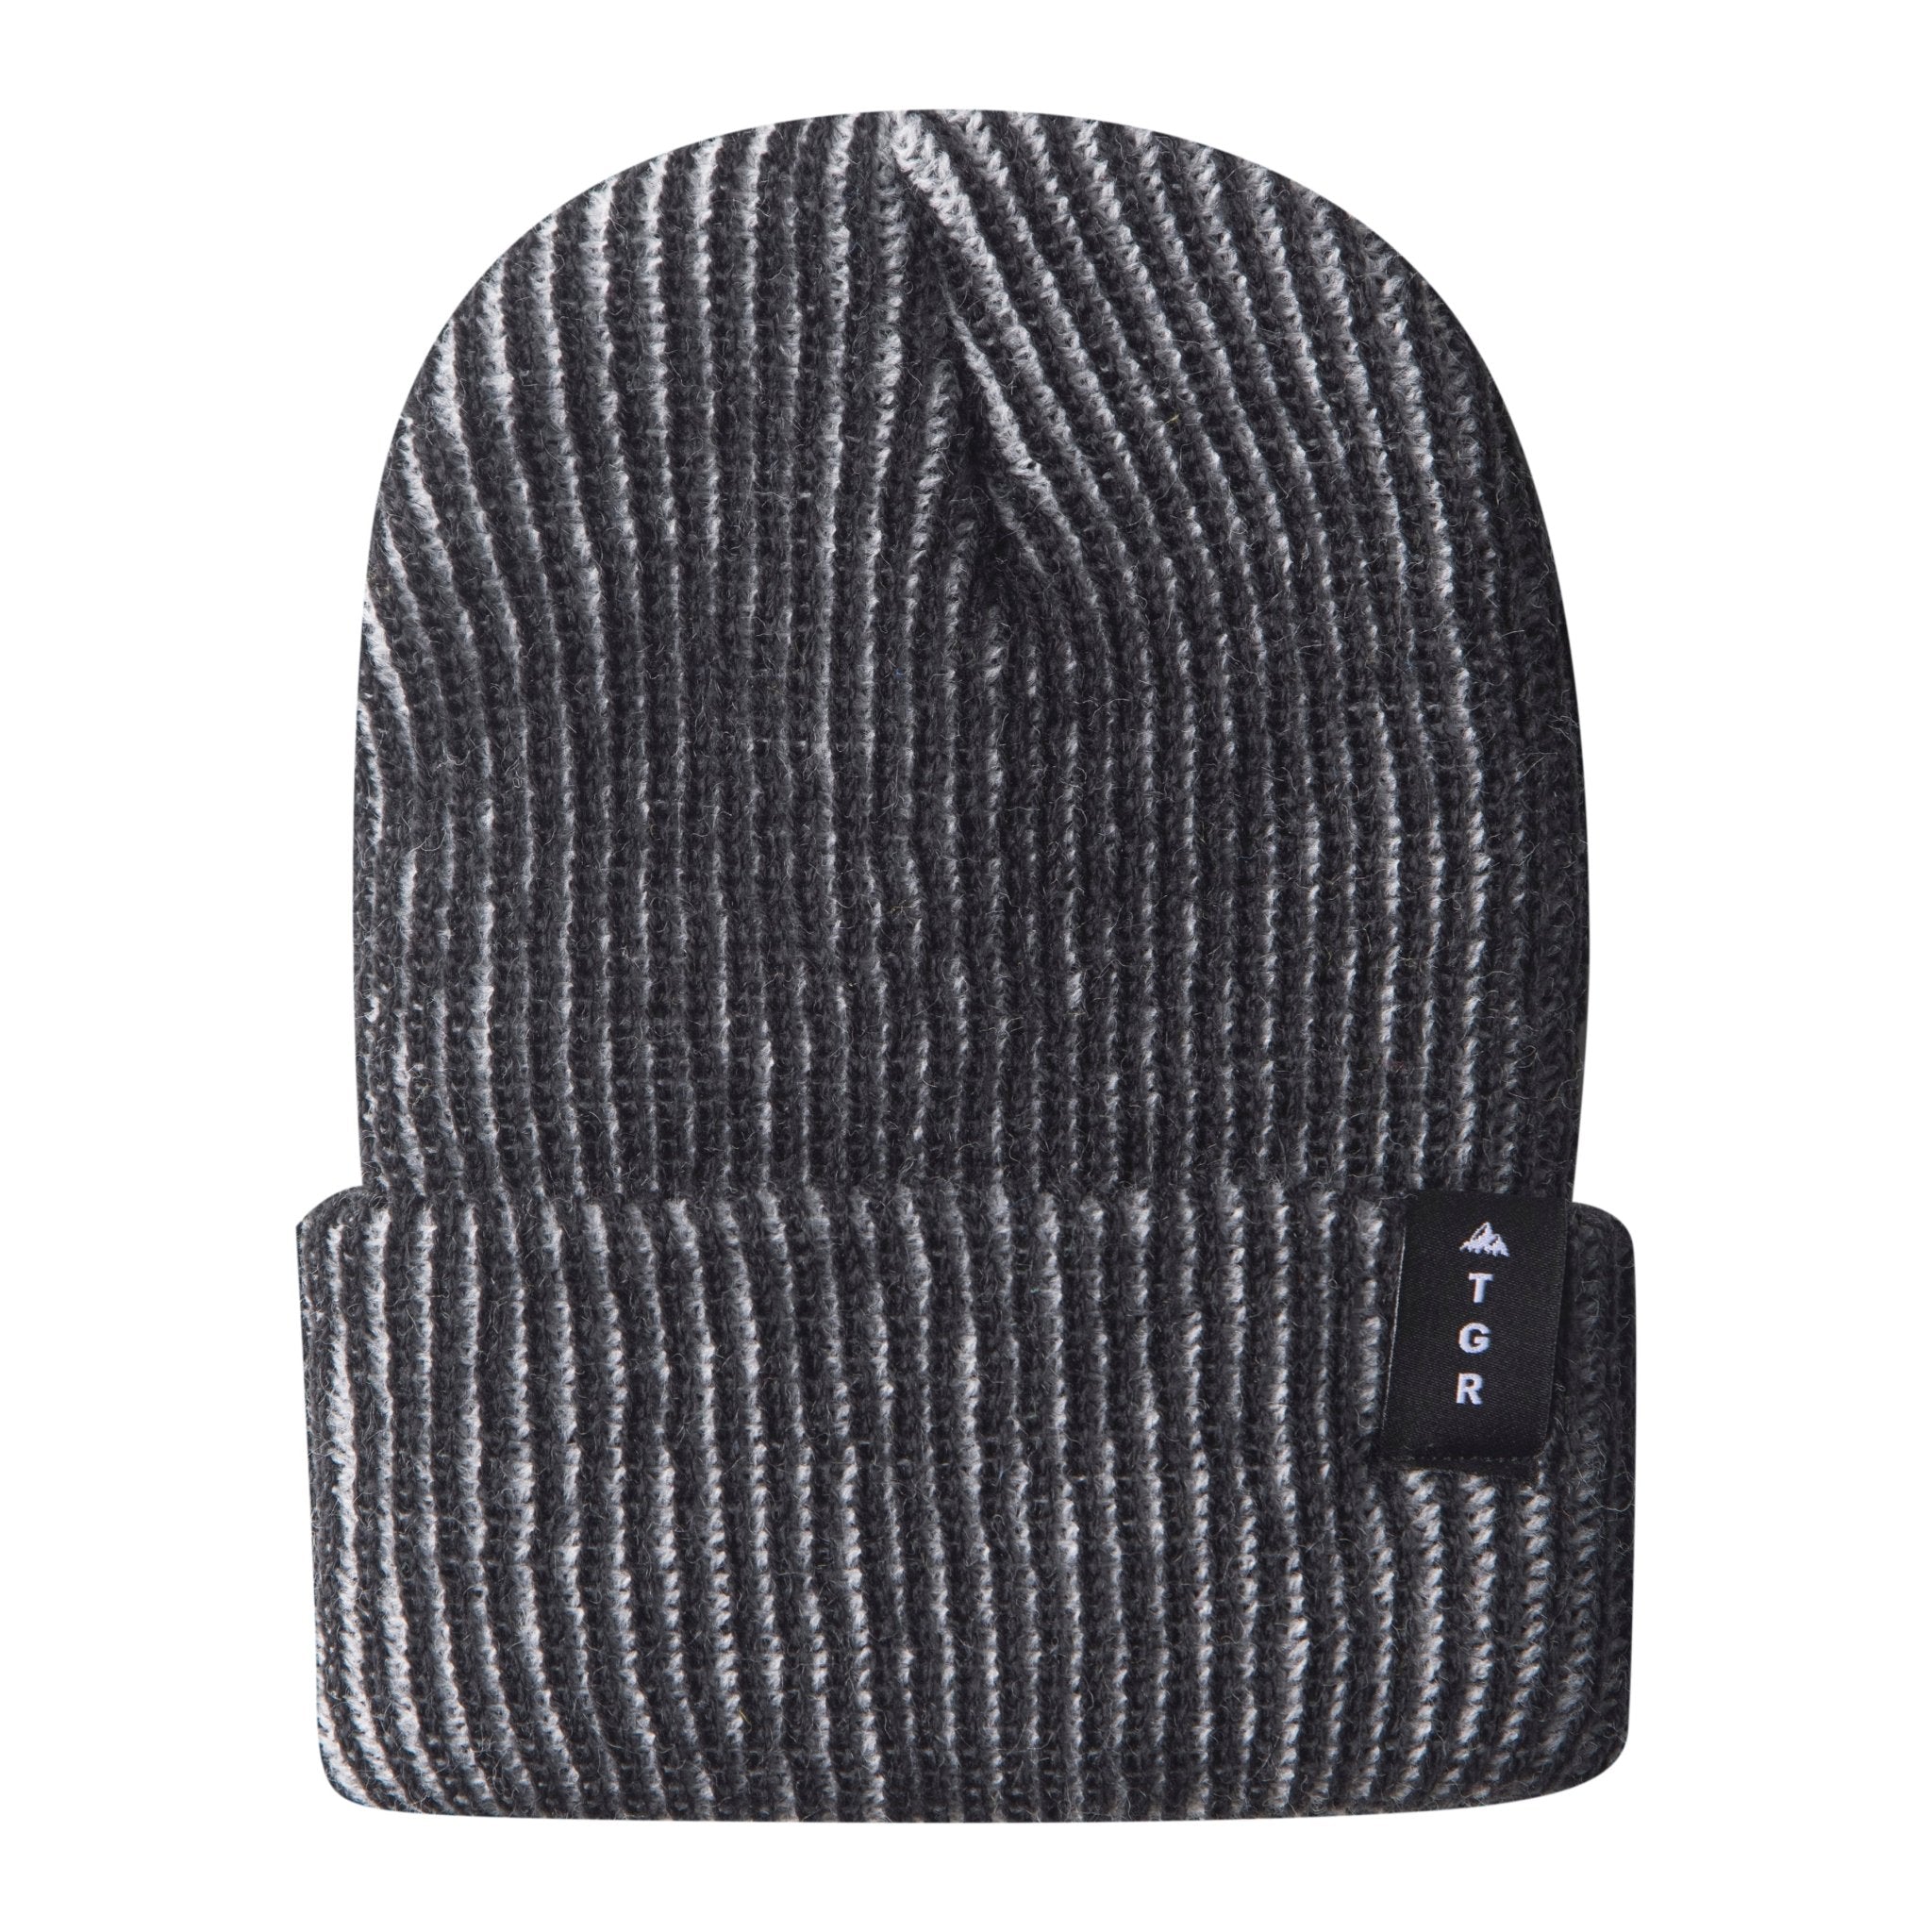 Vertical Stripe Knit Beanie - Made in USA (IN STORE) - Teton Gravity Research